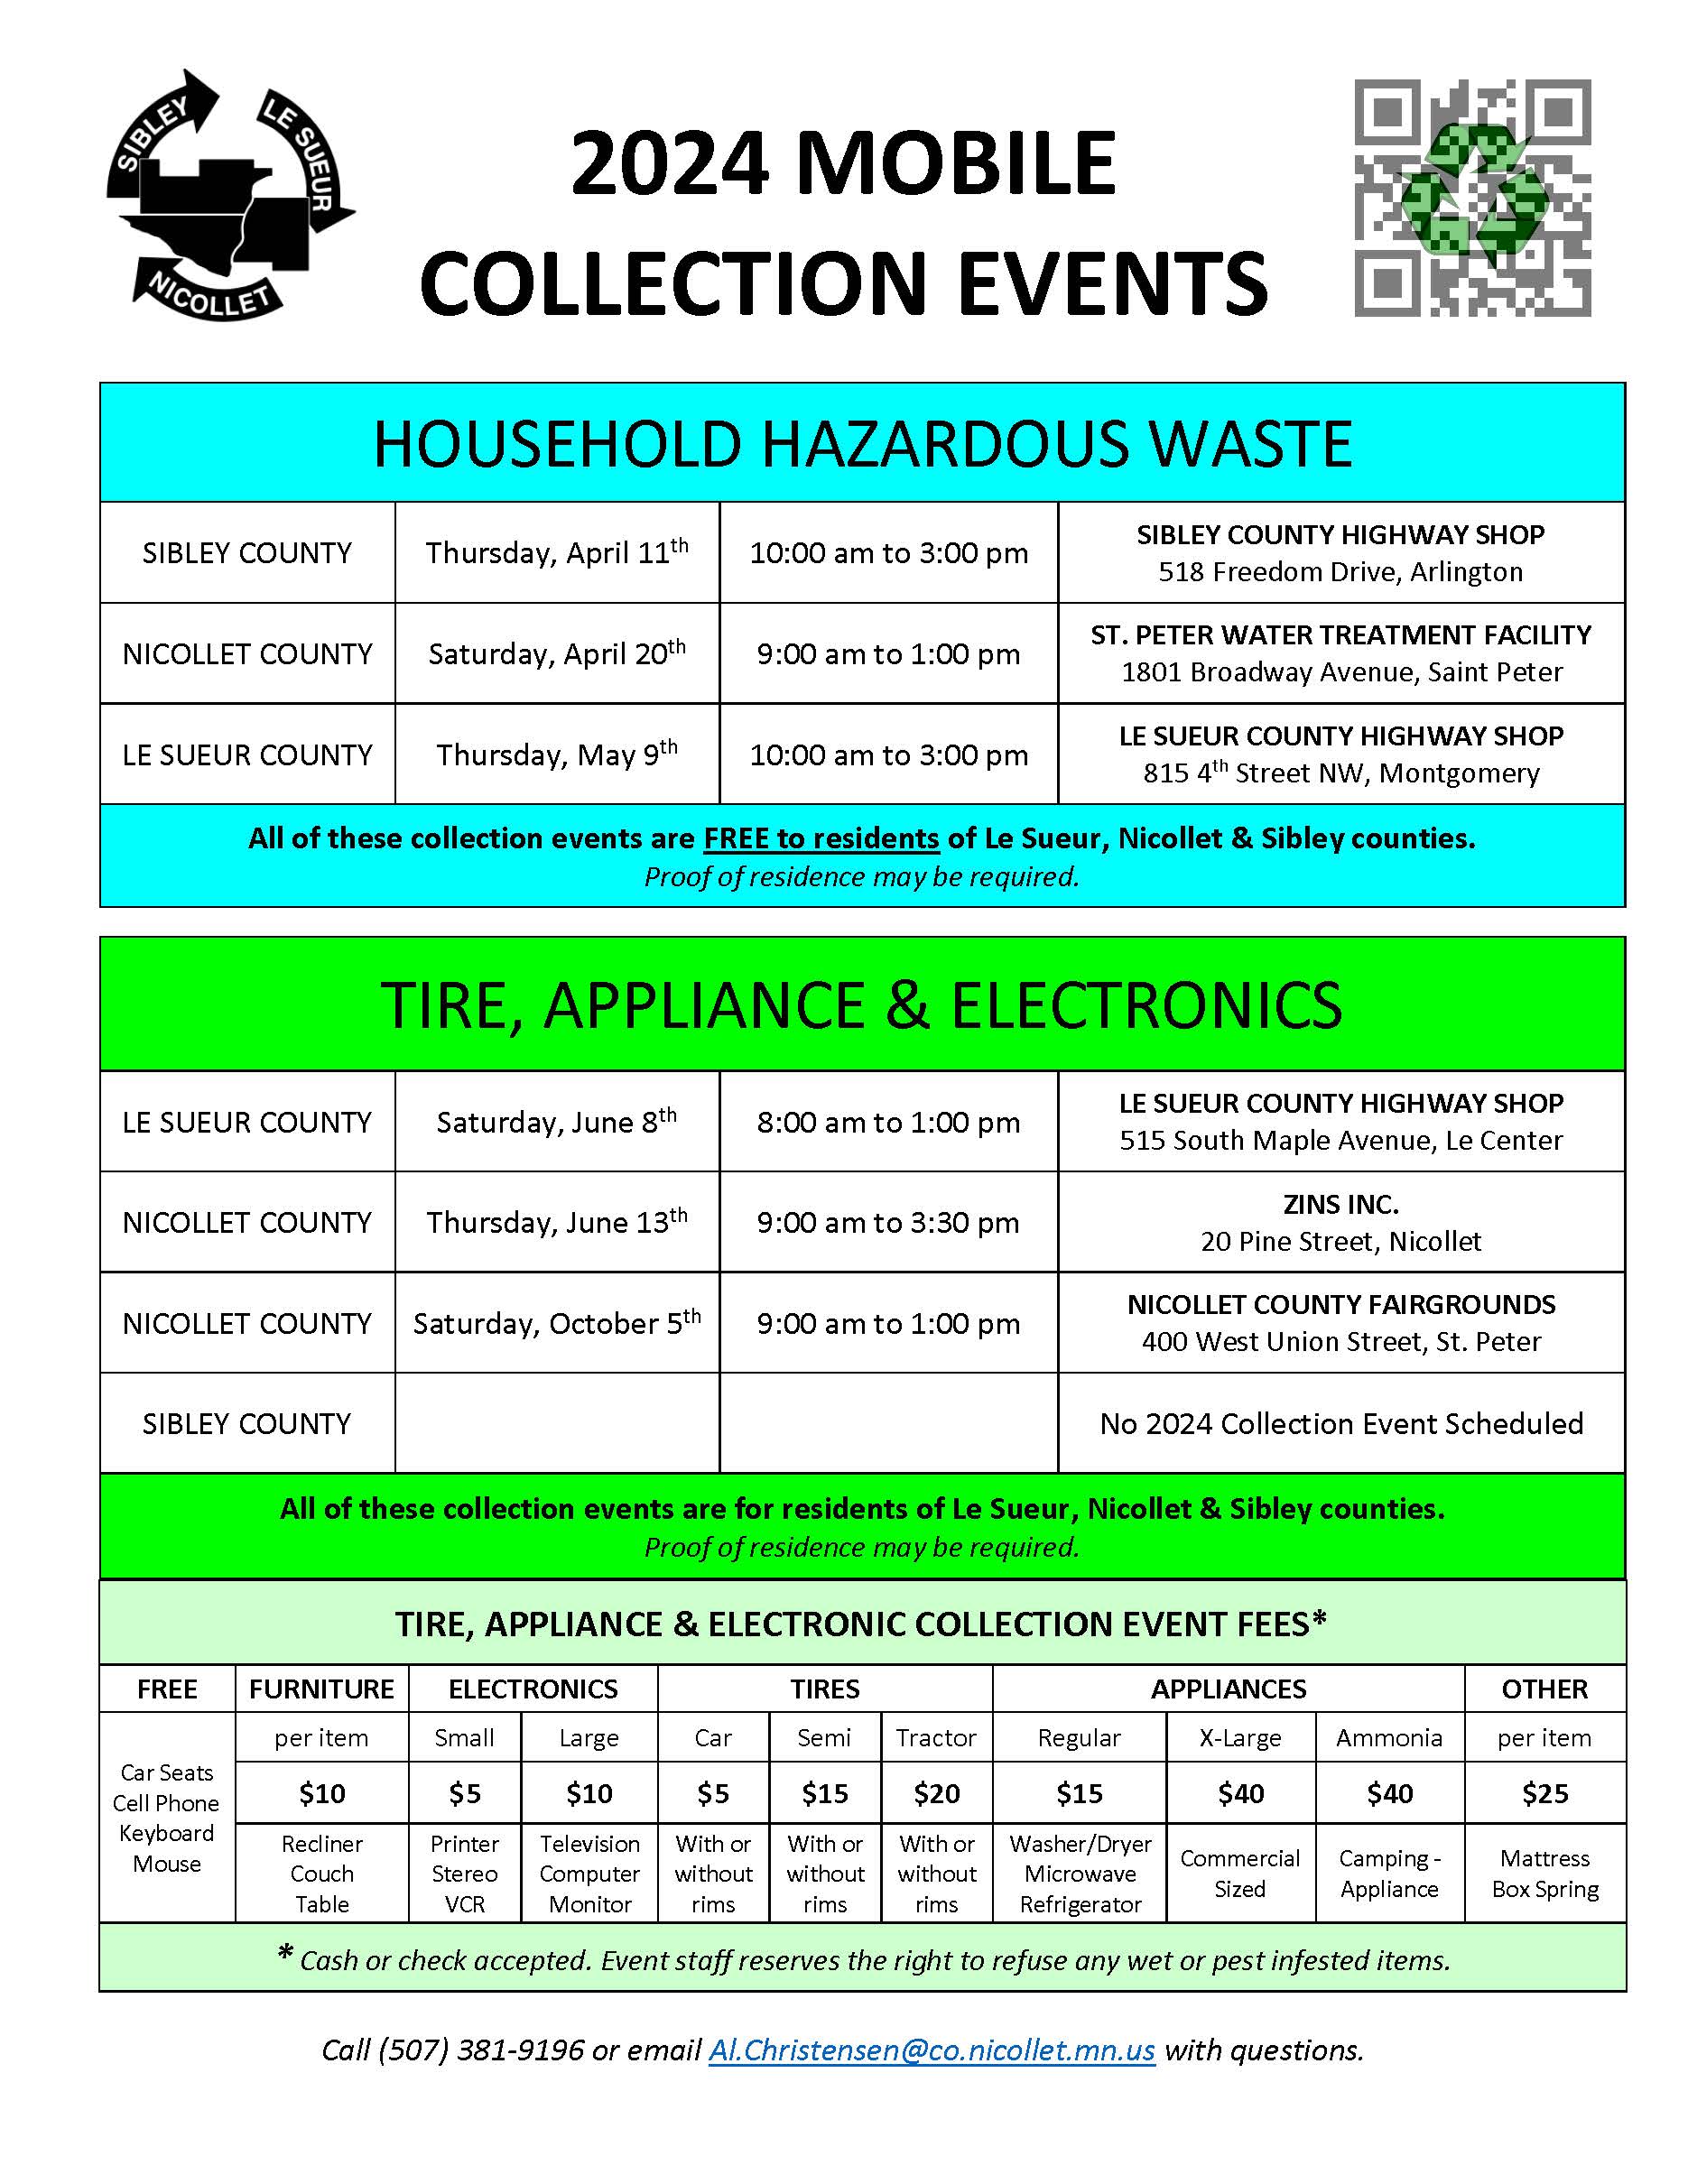 tri county waste collection